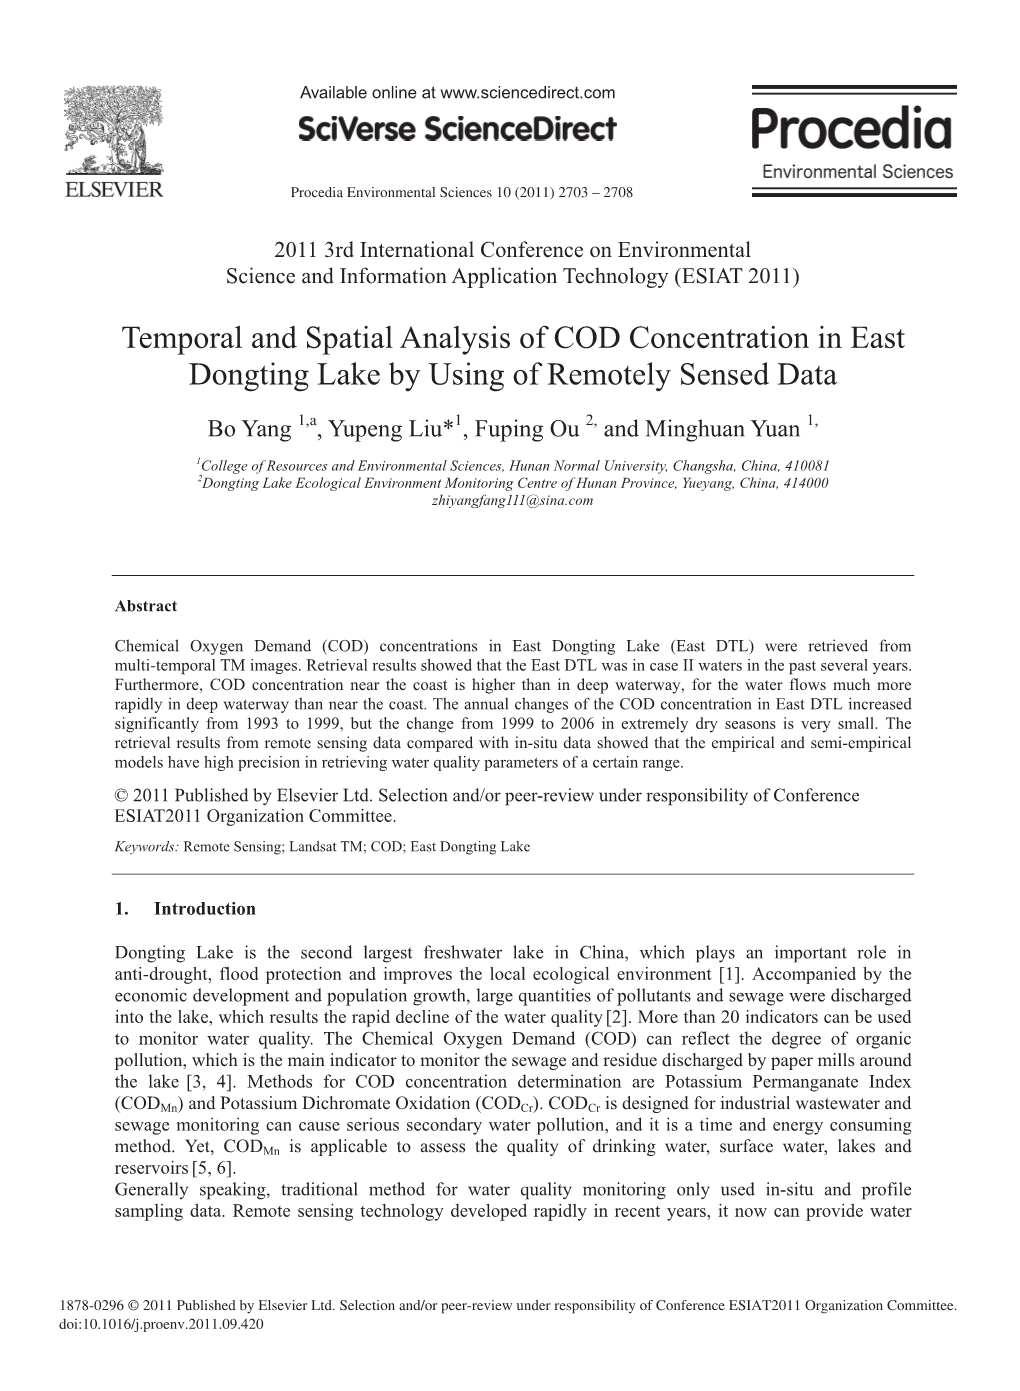 Temporal and Spatial Analysis of COD Concentration in East Dongting Lake by Using of Remotely Sensed Data